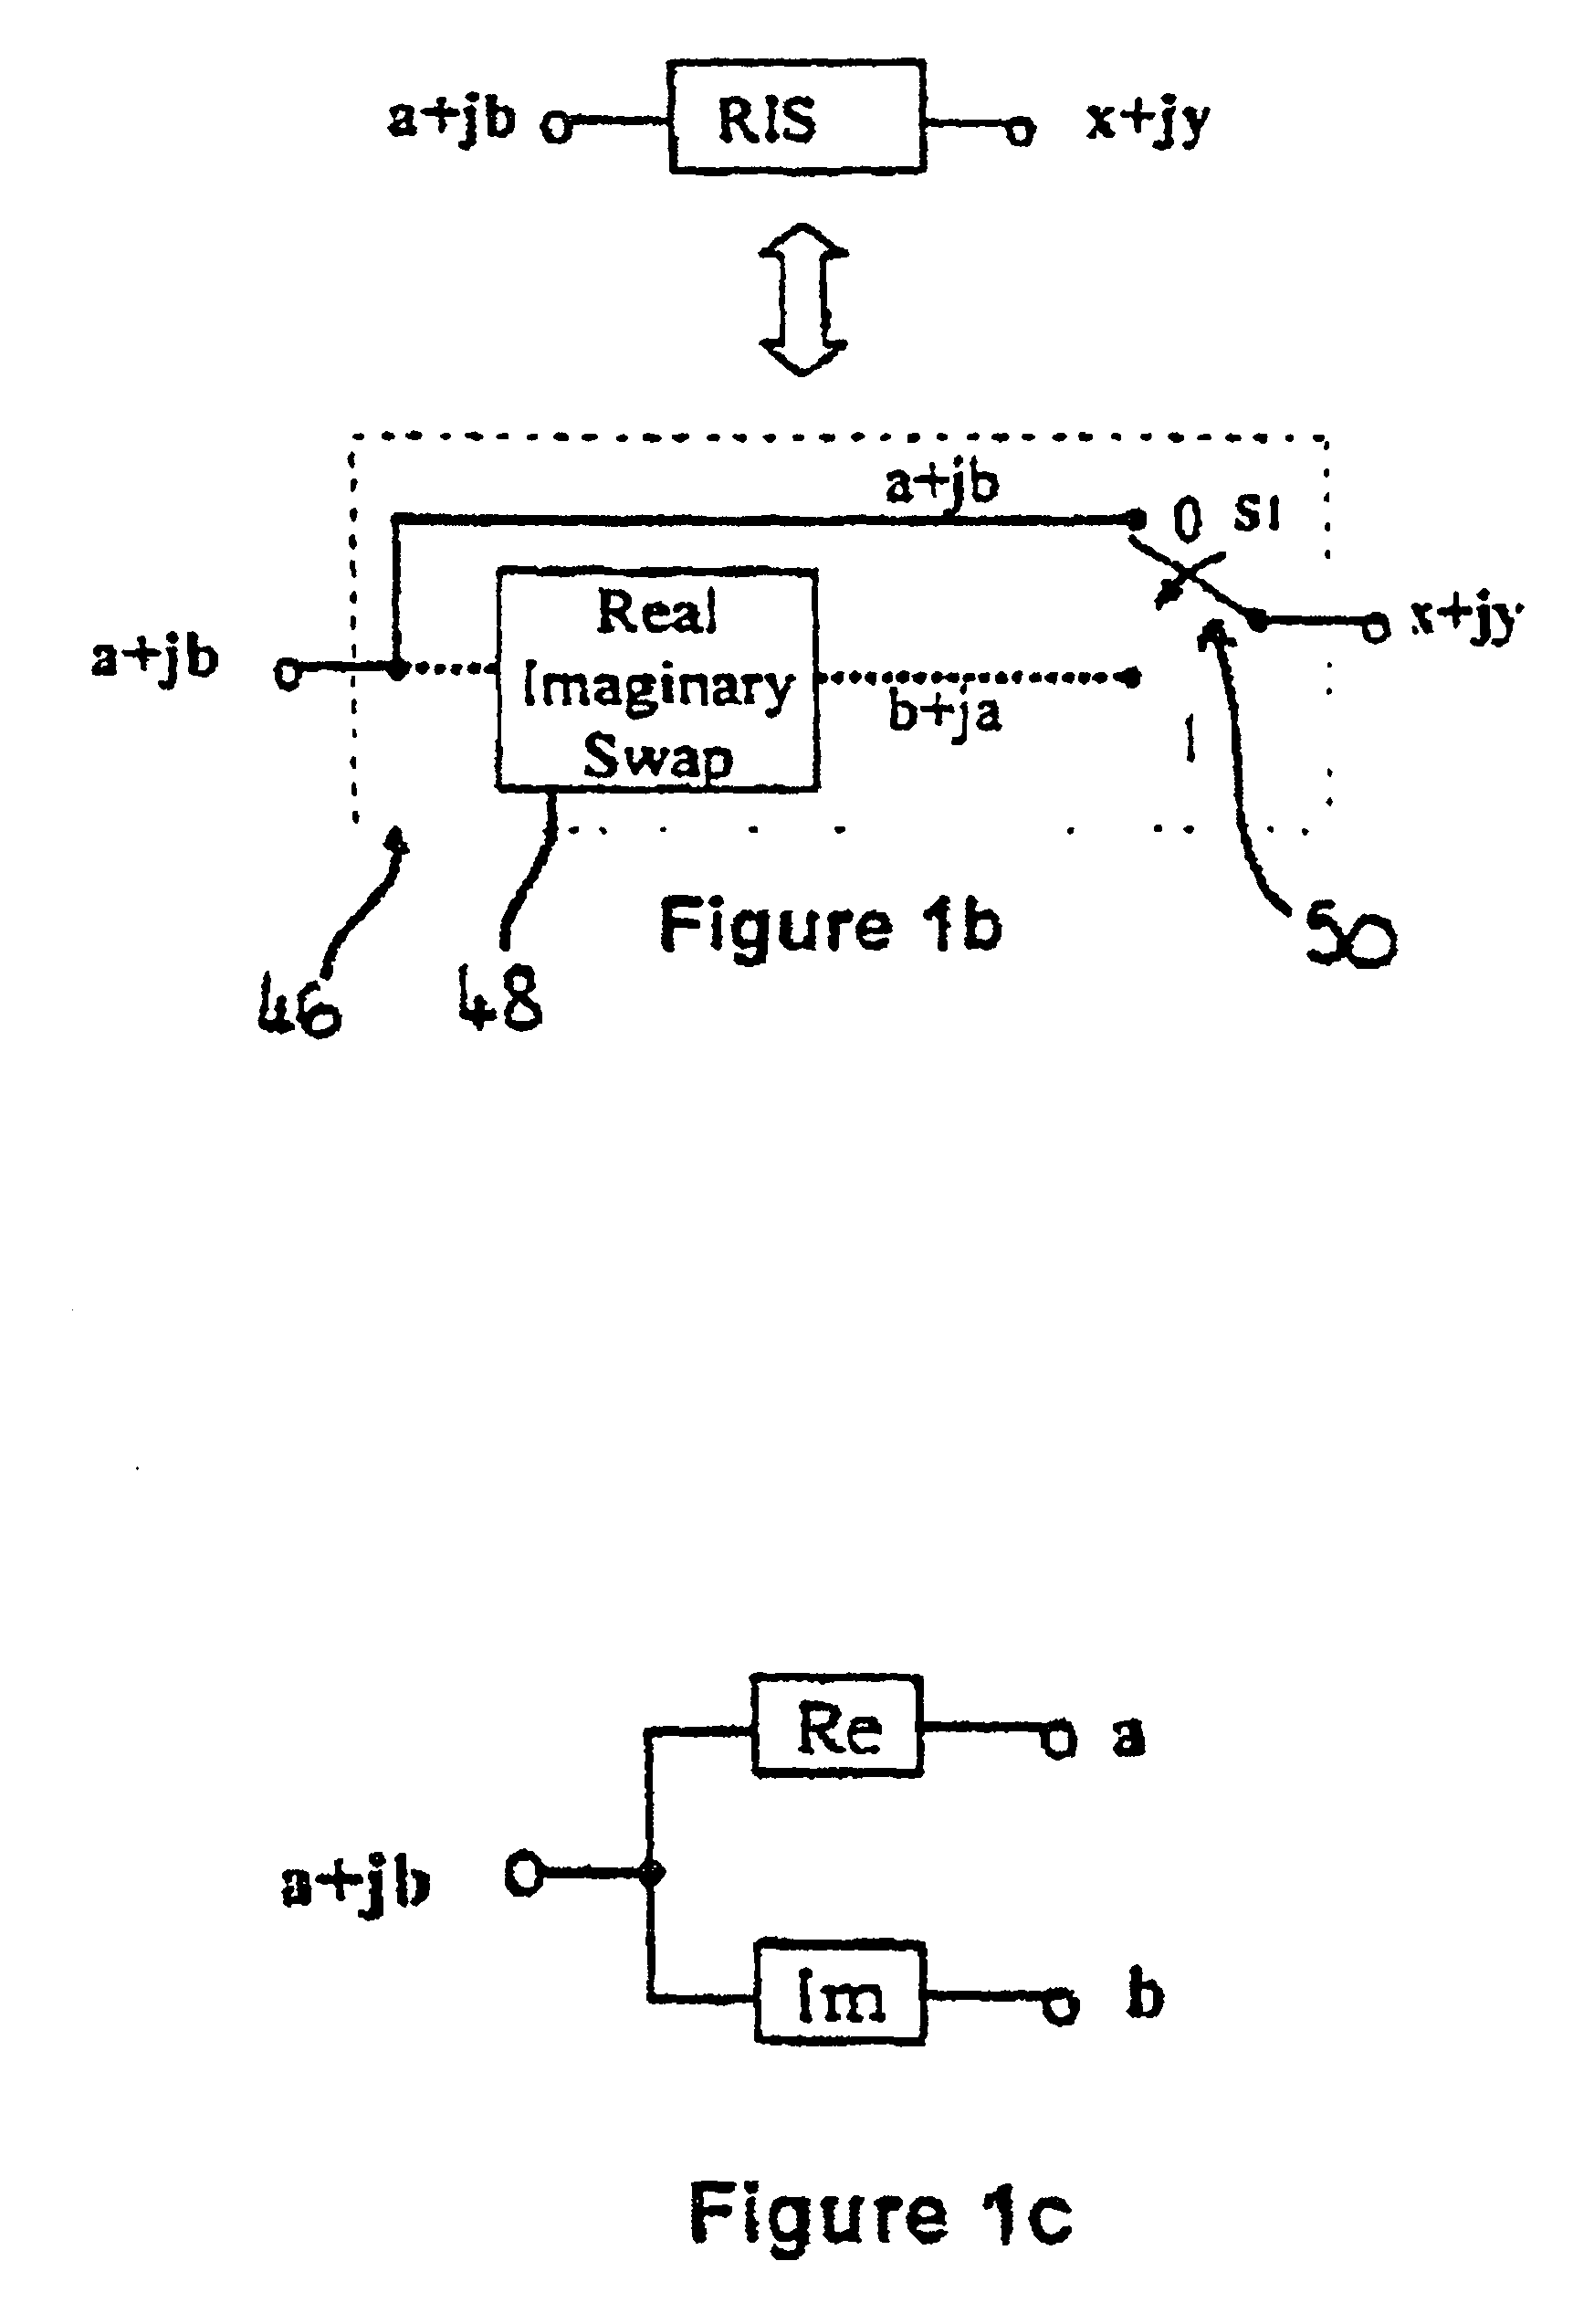 Processor and method for performing a fast fourier transform and/or an inverse fast fourier transform of a complex input signal